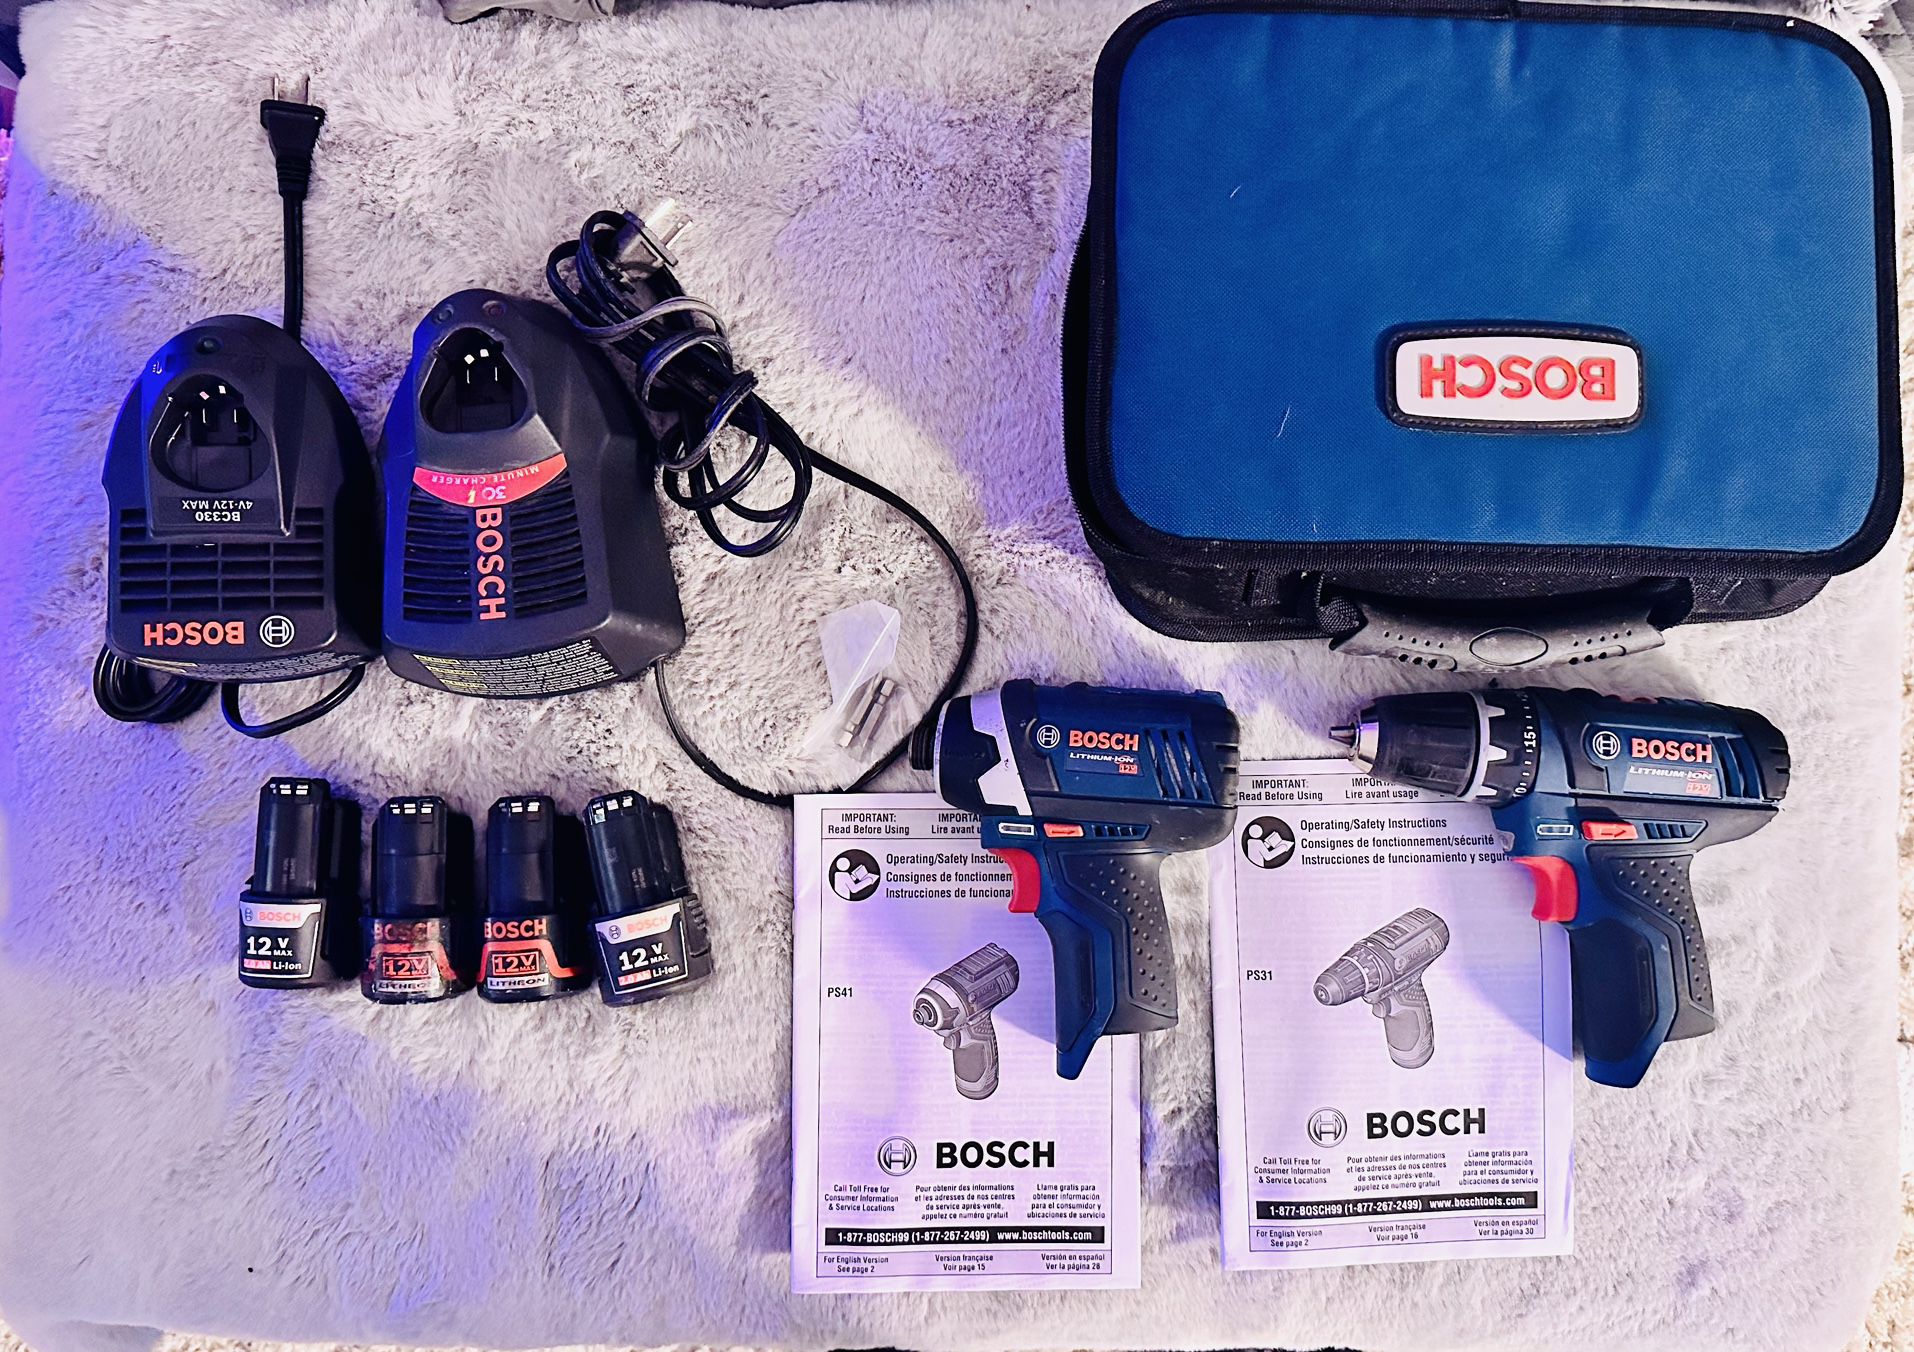 BOSCH 12-Volt Max Lithium-Ion 2-Tool Cordless Combo Kit  with 4 batteries/2 chargers